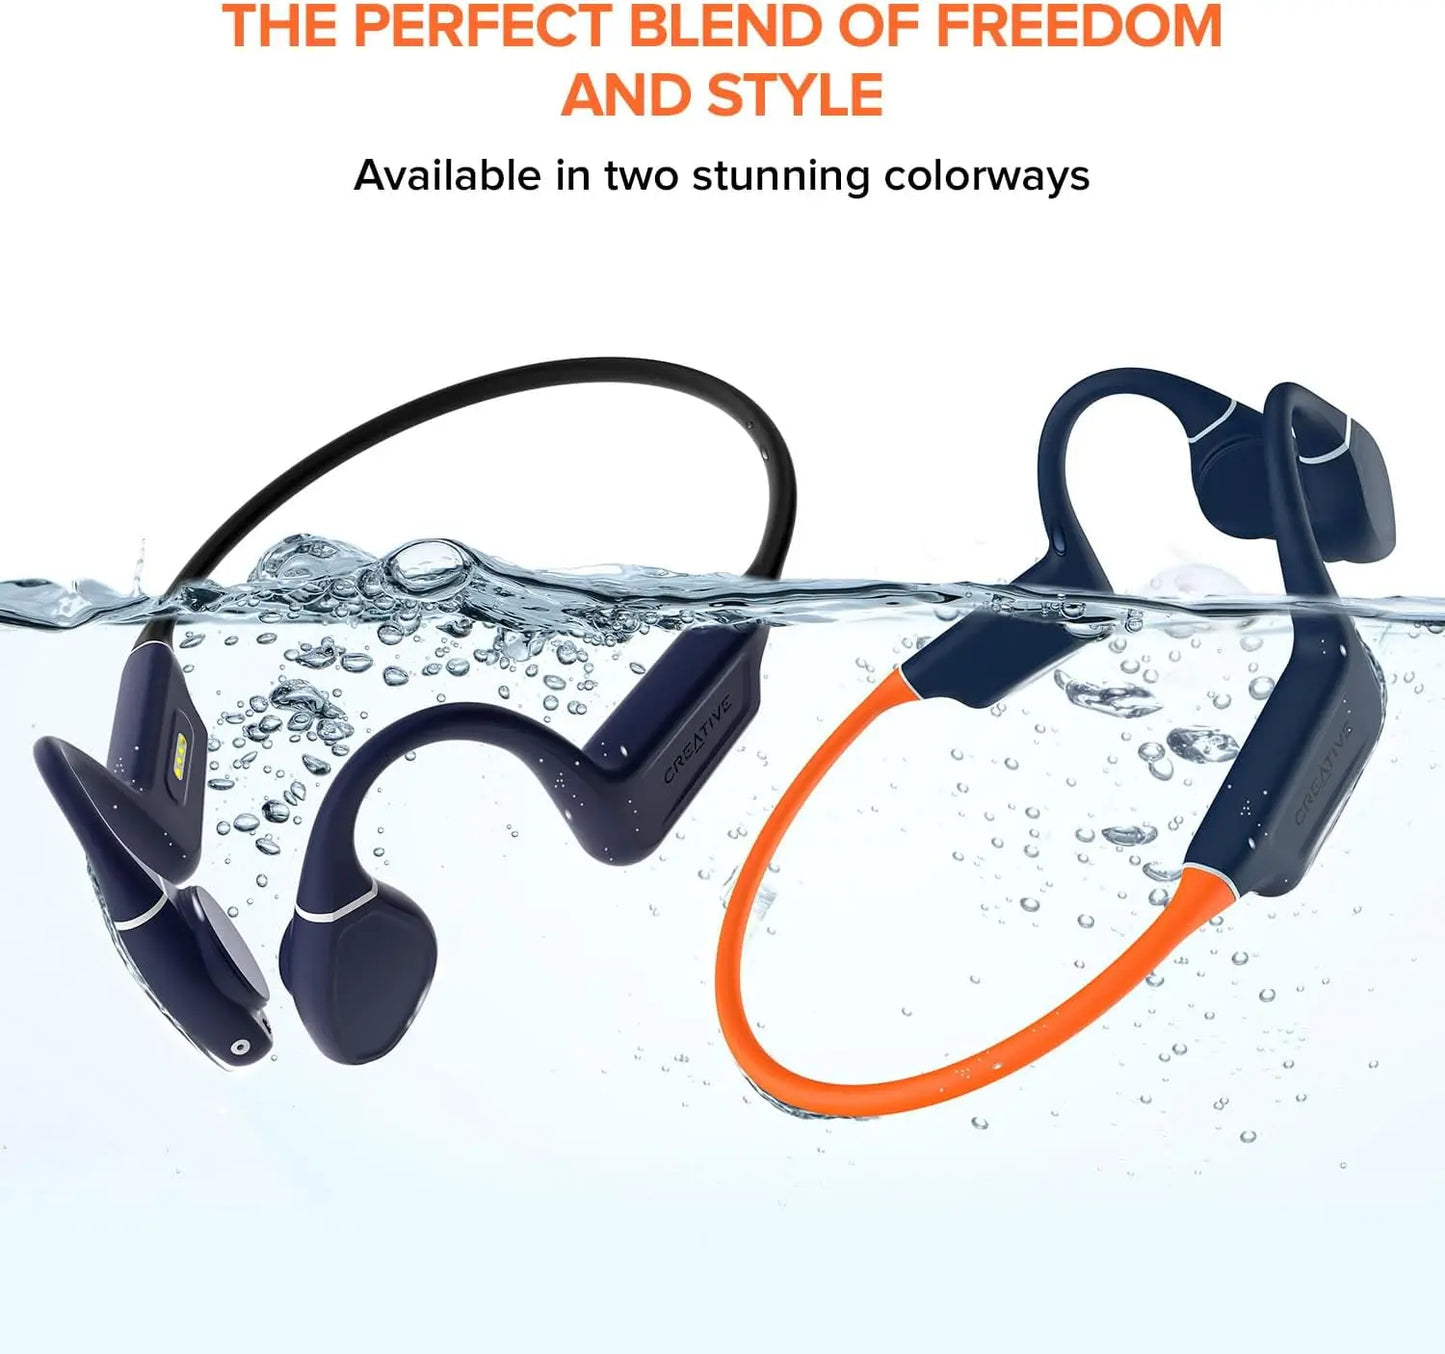 Creative Outlier Free Pro+ Wireless Waterproof Bone Conduction Headphones with Adjustable Transducers, Built-in 8 GB MP3 Mic